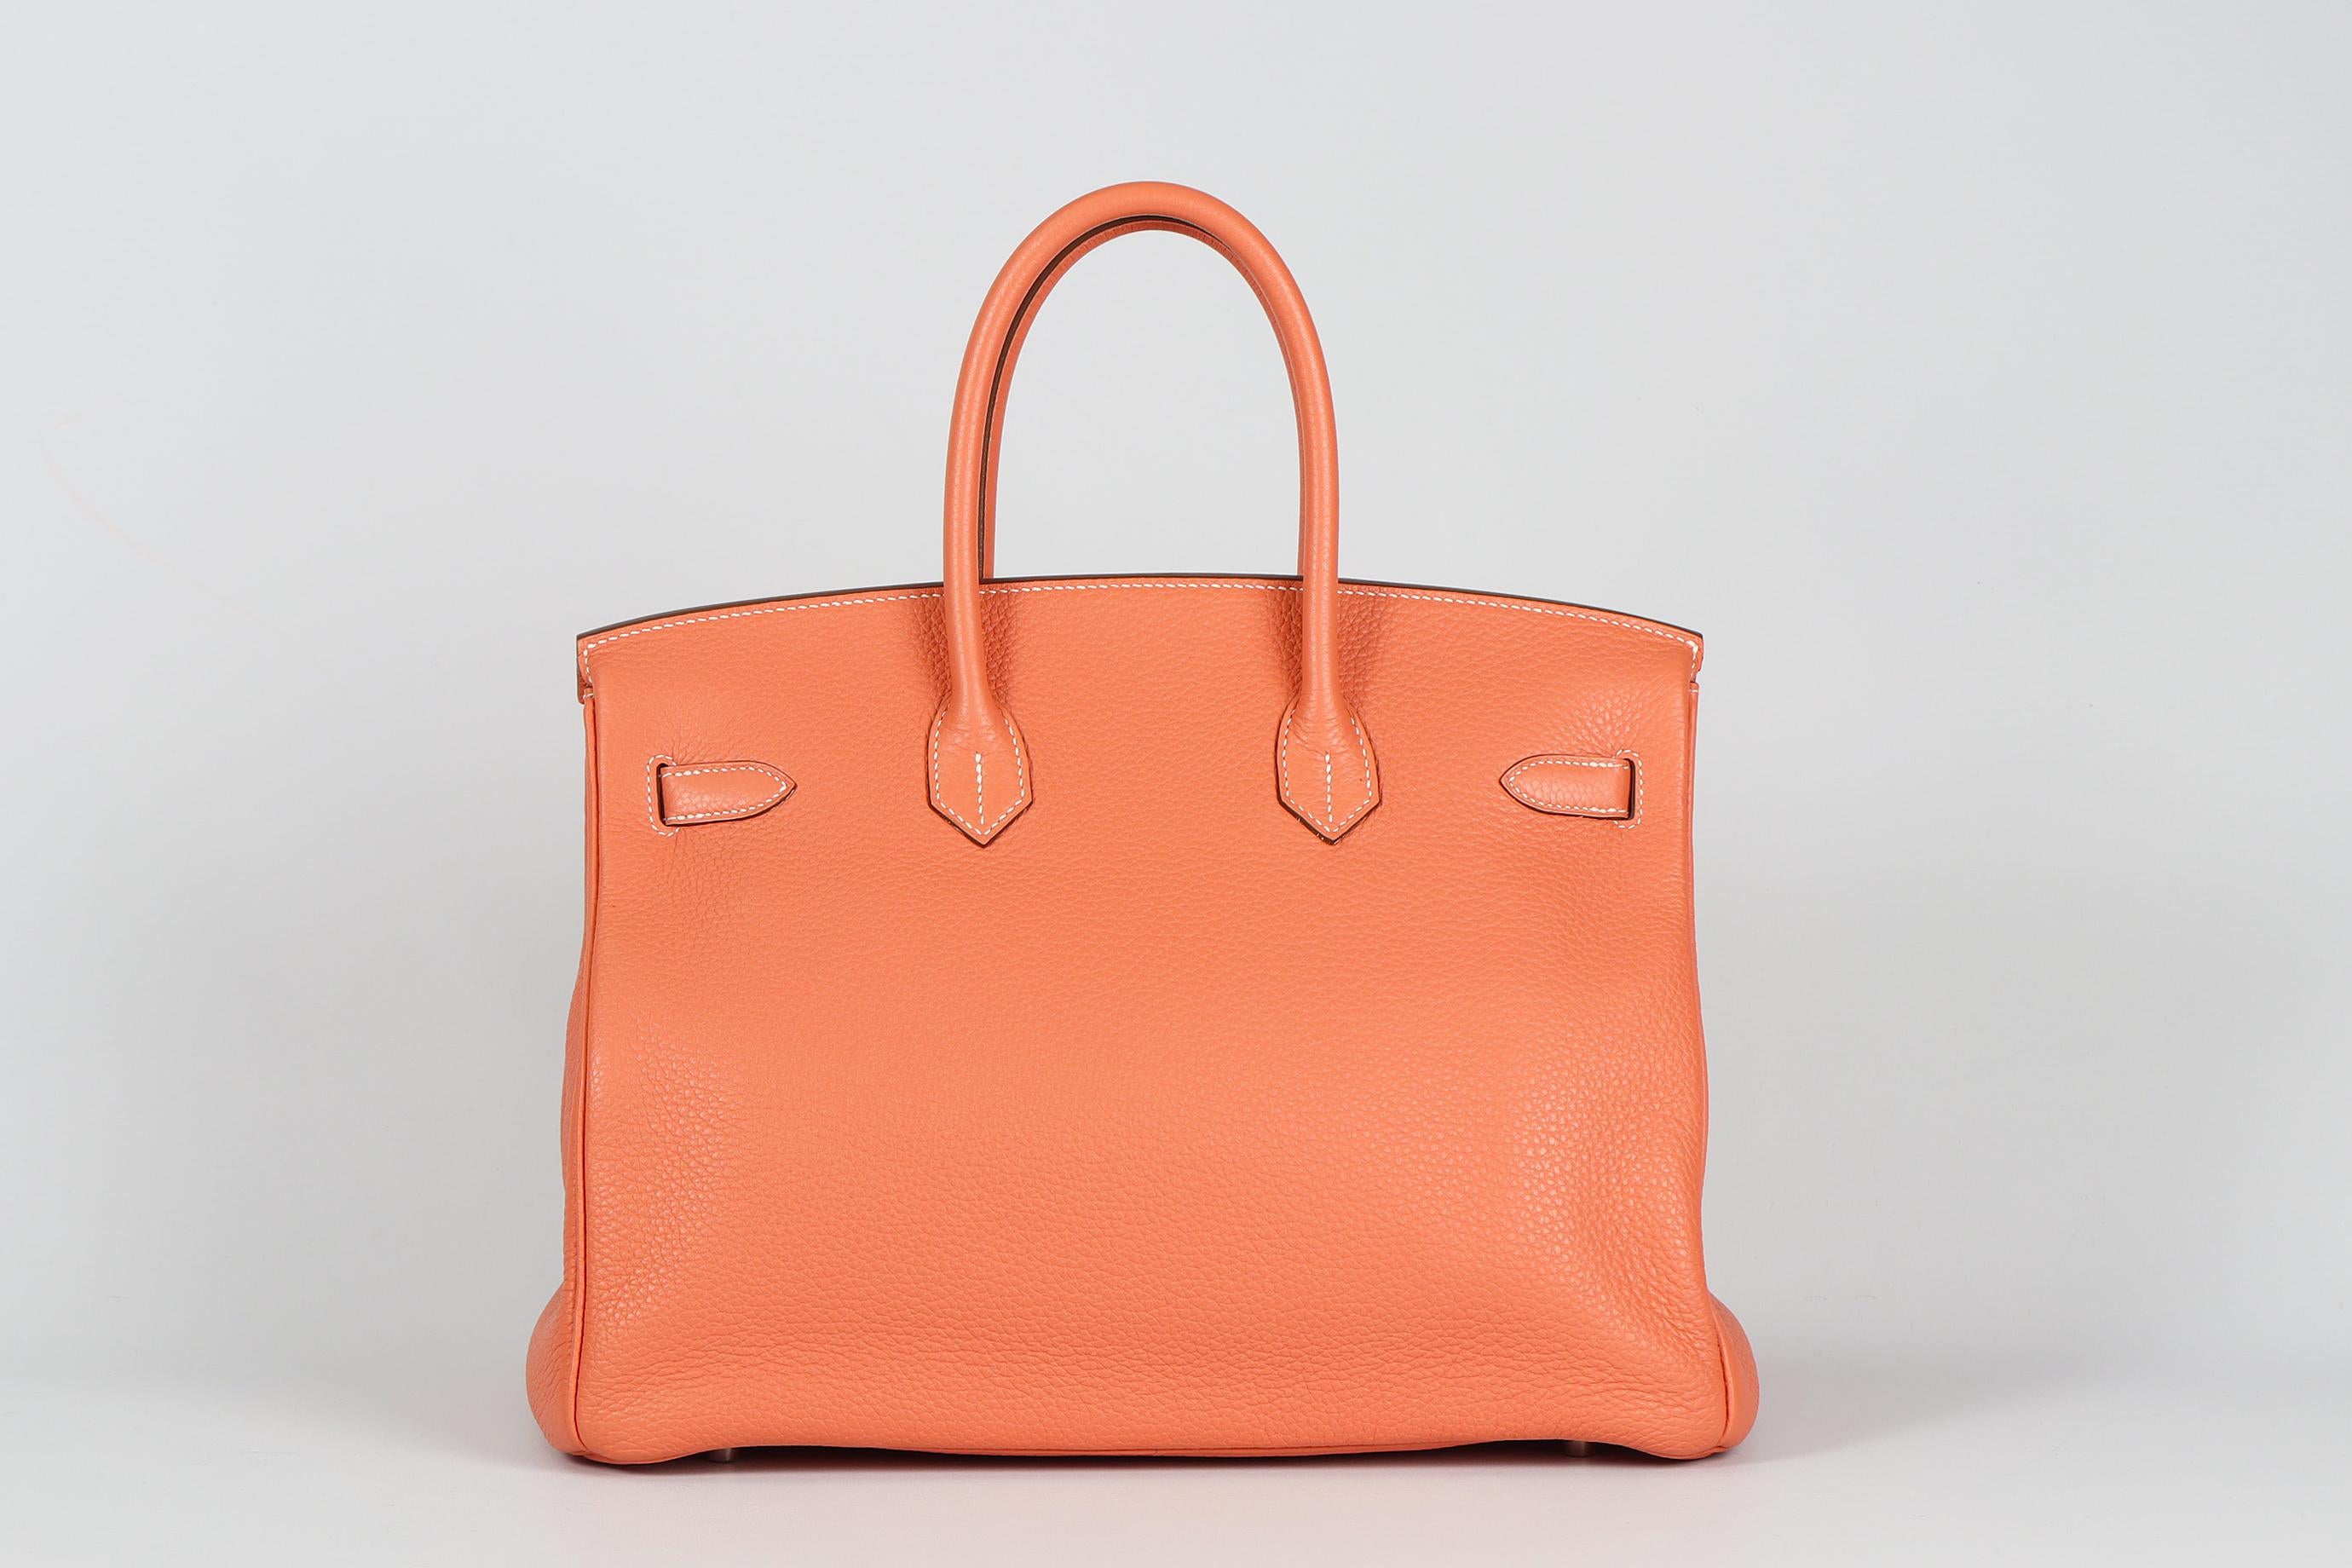 Hermès 2013 Birkin 35cm Clemence Leather Bag In Excellent Condition For Sale In London, GB